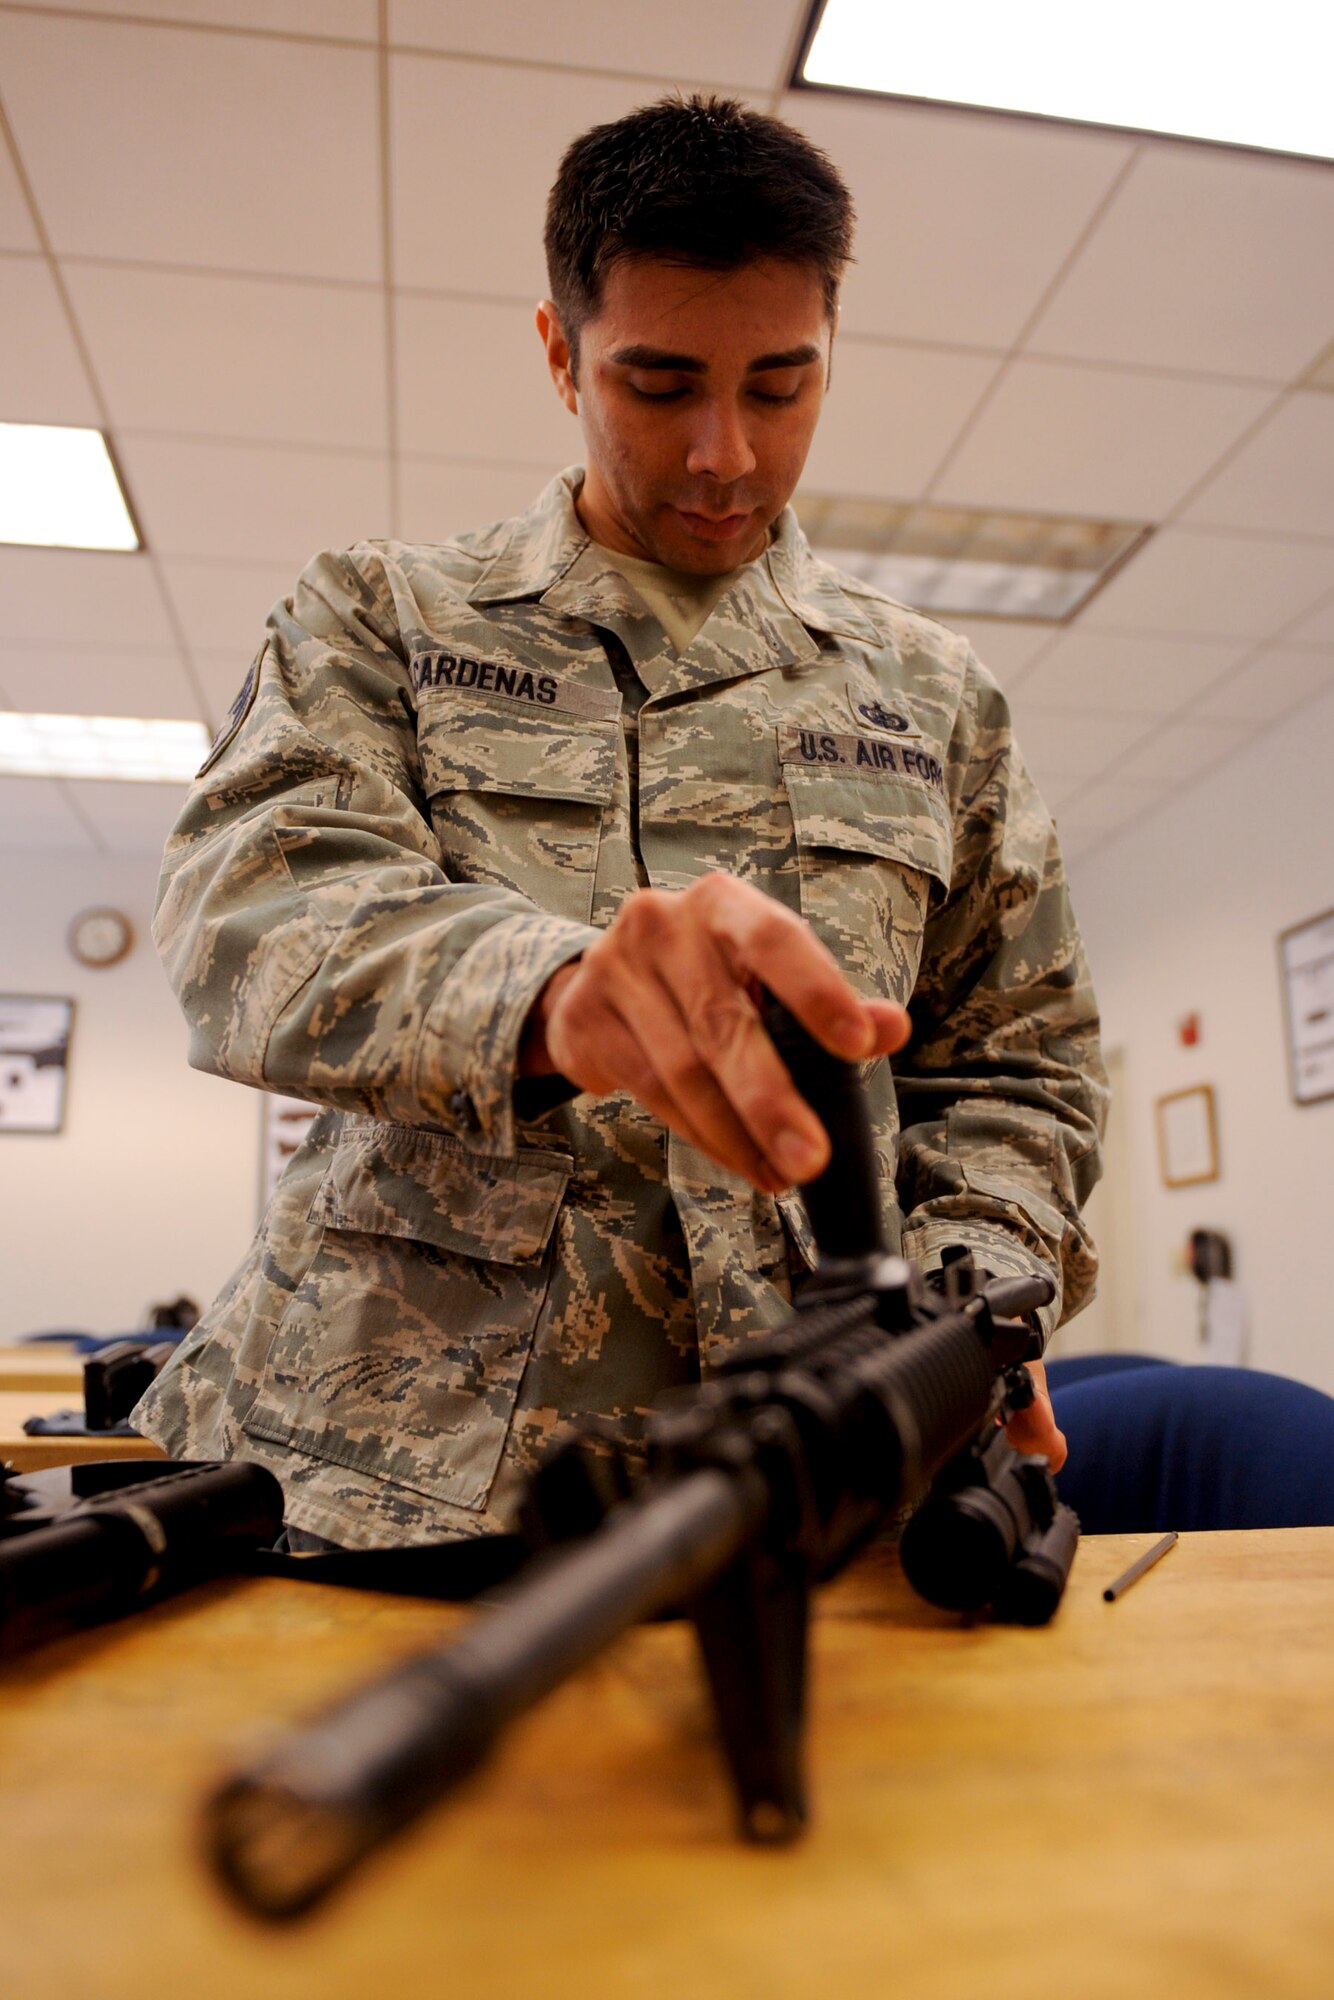 VANDENBERG AIR FORCE BASE, Calif. -- Staff Sgt. Anthony Cardenas, a 382nd Training Squadron resource advisor, disassembles an M4 carbine during the first class of the new Rifle Carbine Air Force Qualification course here Tuesday, Dec. 6, 2011. The new course, in which Airman fire nearly double the amount of rounds of the previous course, contains both basic firing positions (prone, sitting, kneeling, standing) and advanced tactical movements. (U.S. Air Force/Staff Sgt. Levi Riendeau)